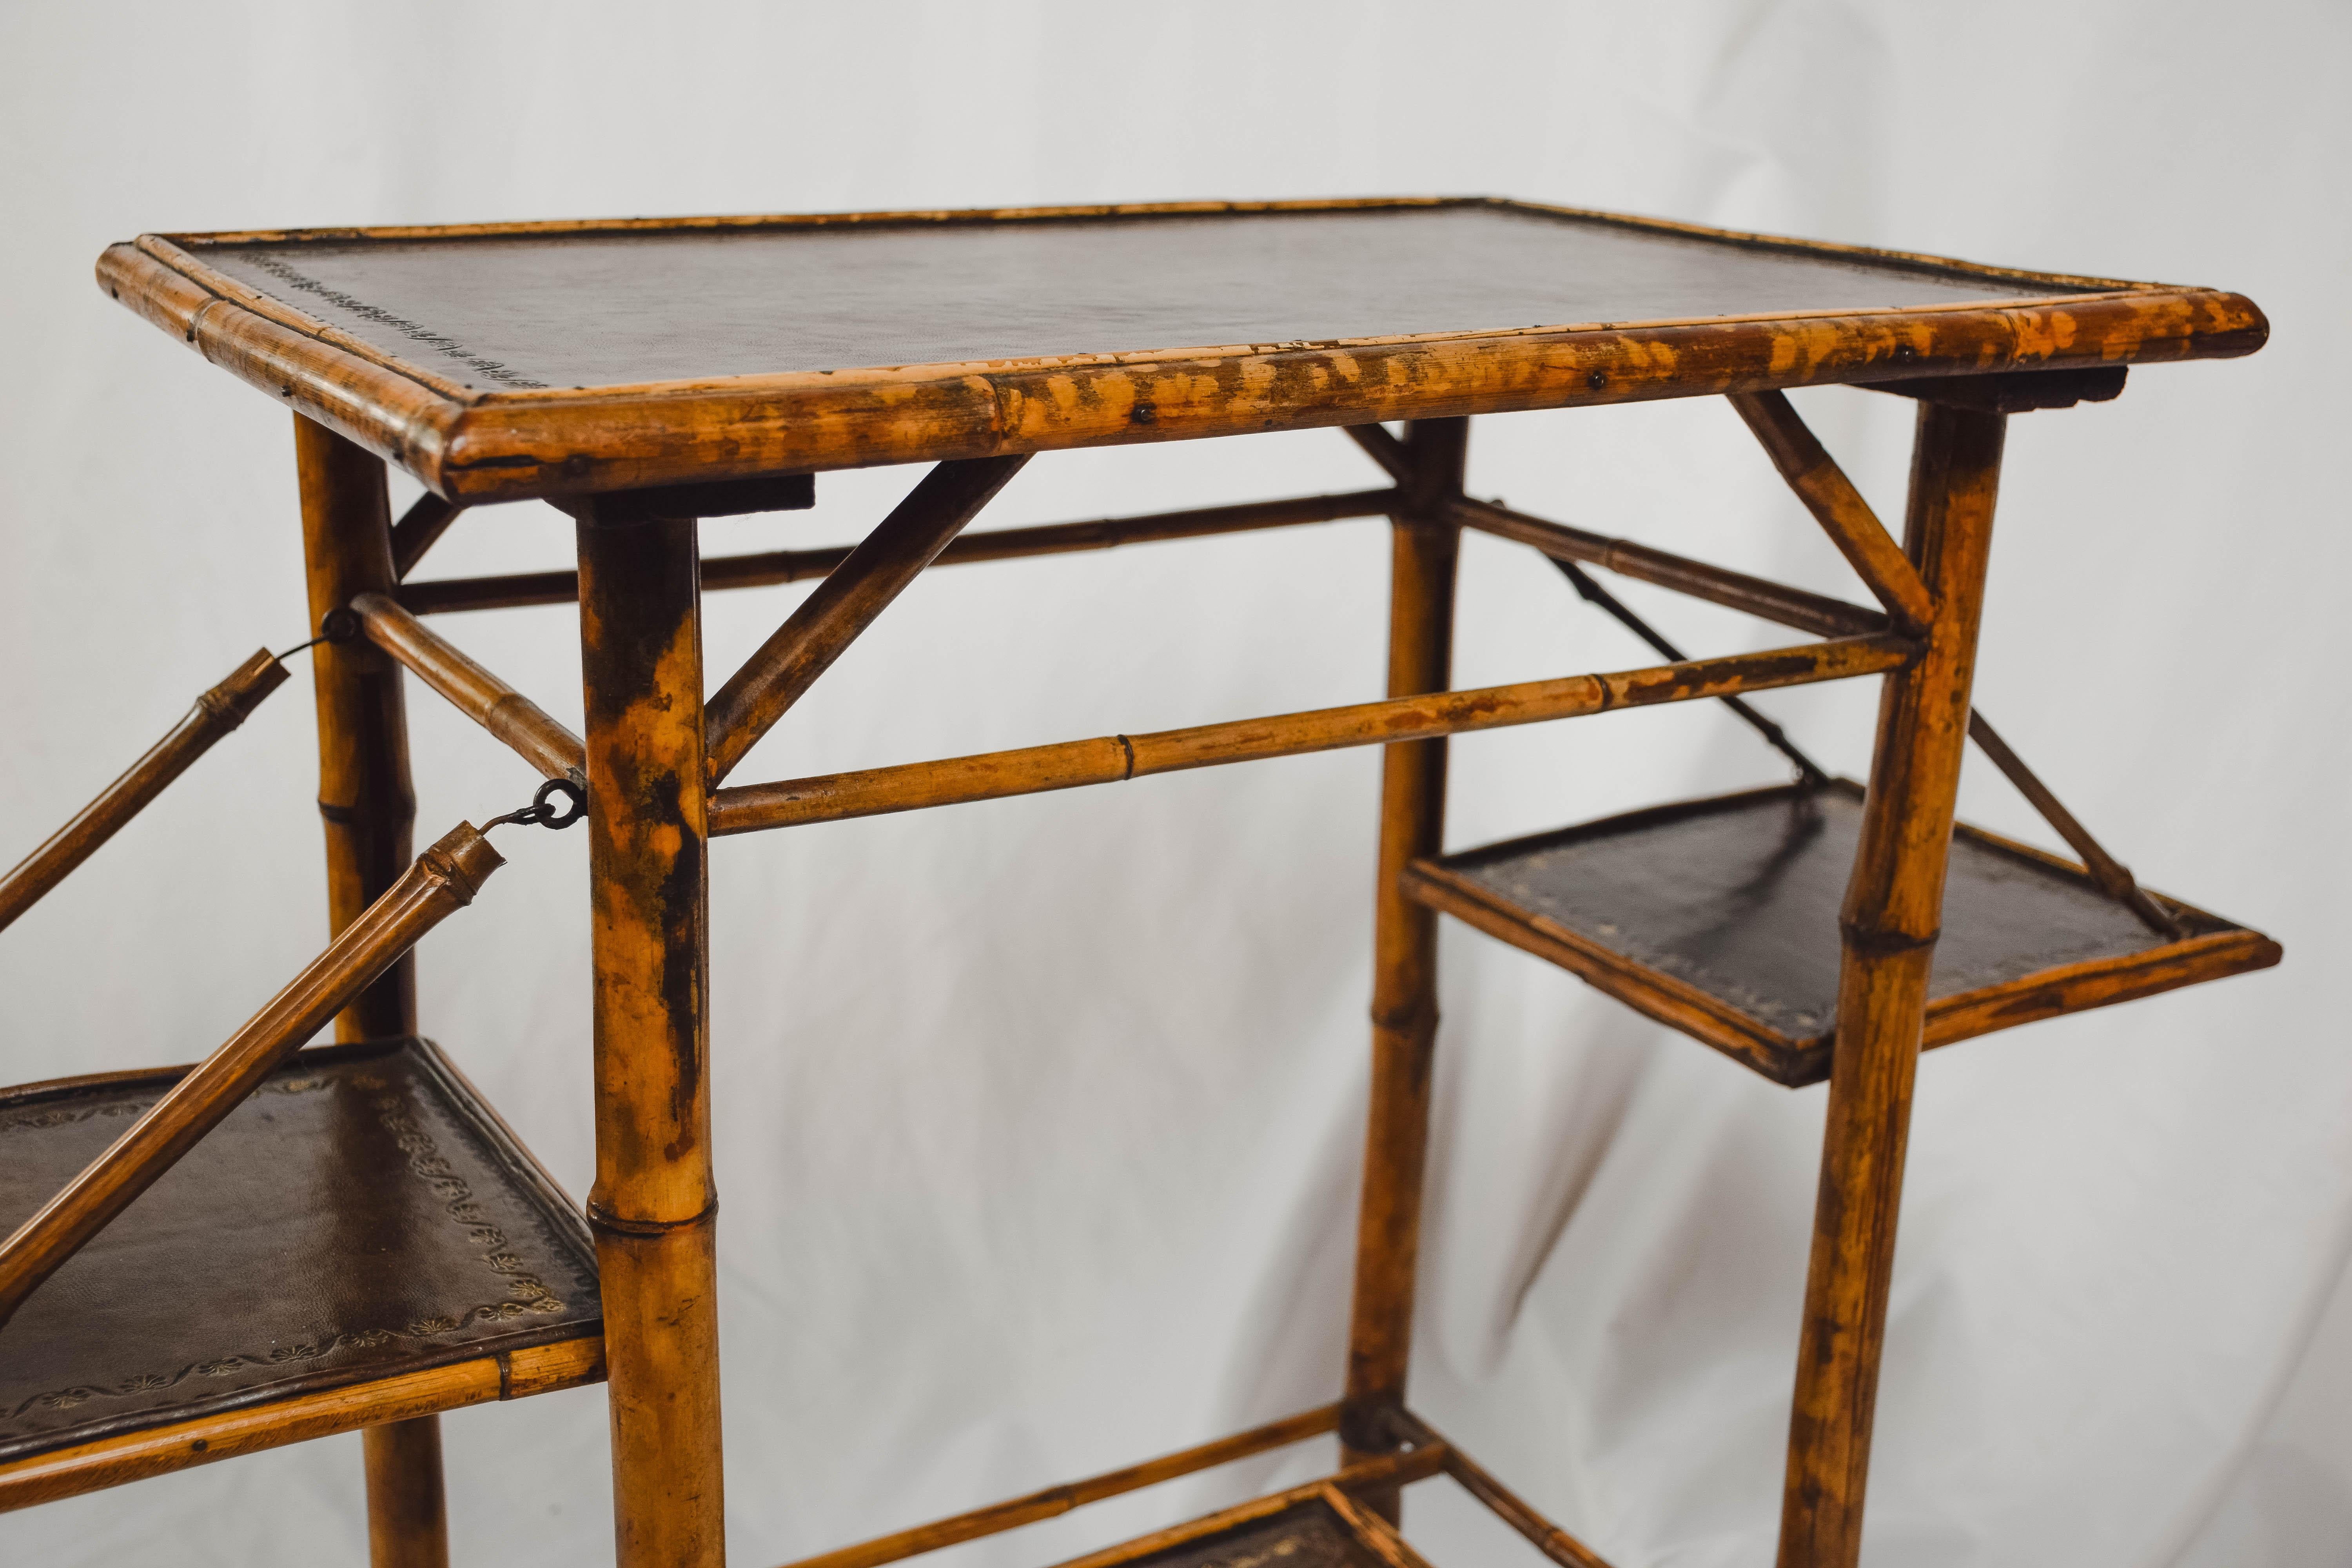 British Colonial Vintage Tiger Bamboo Table